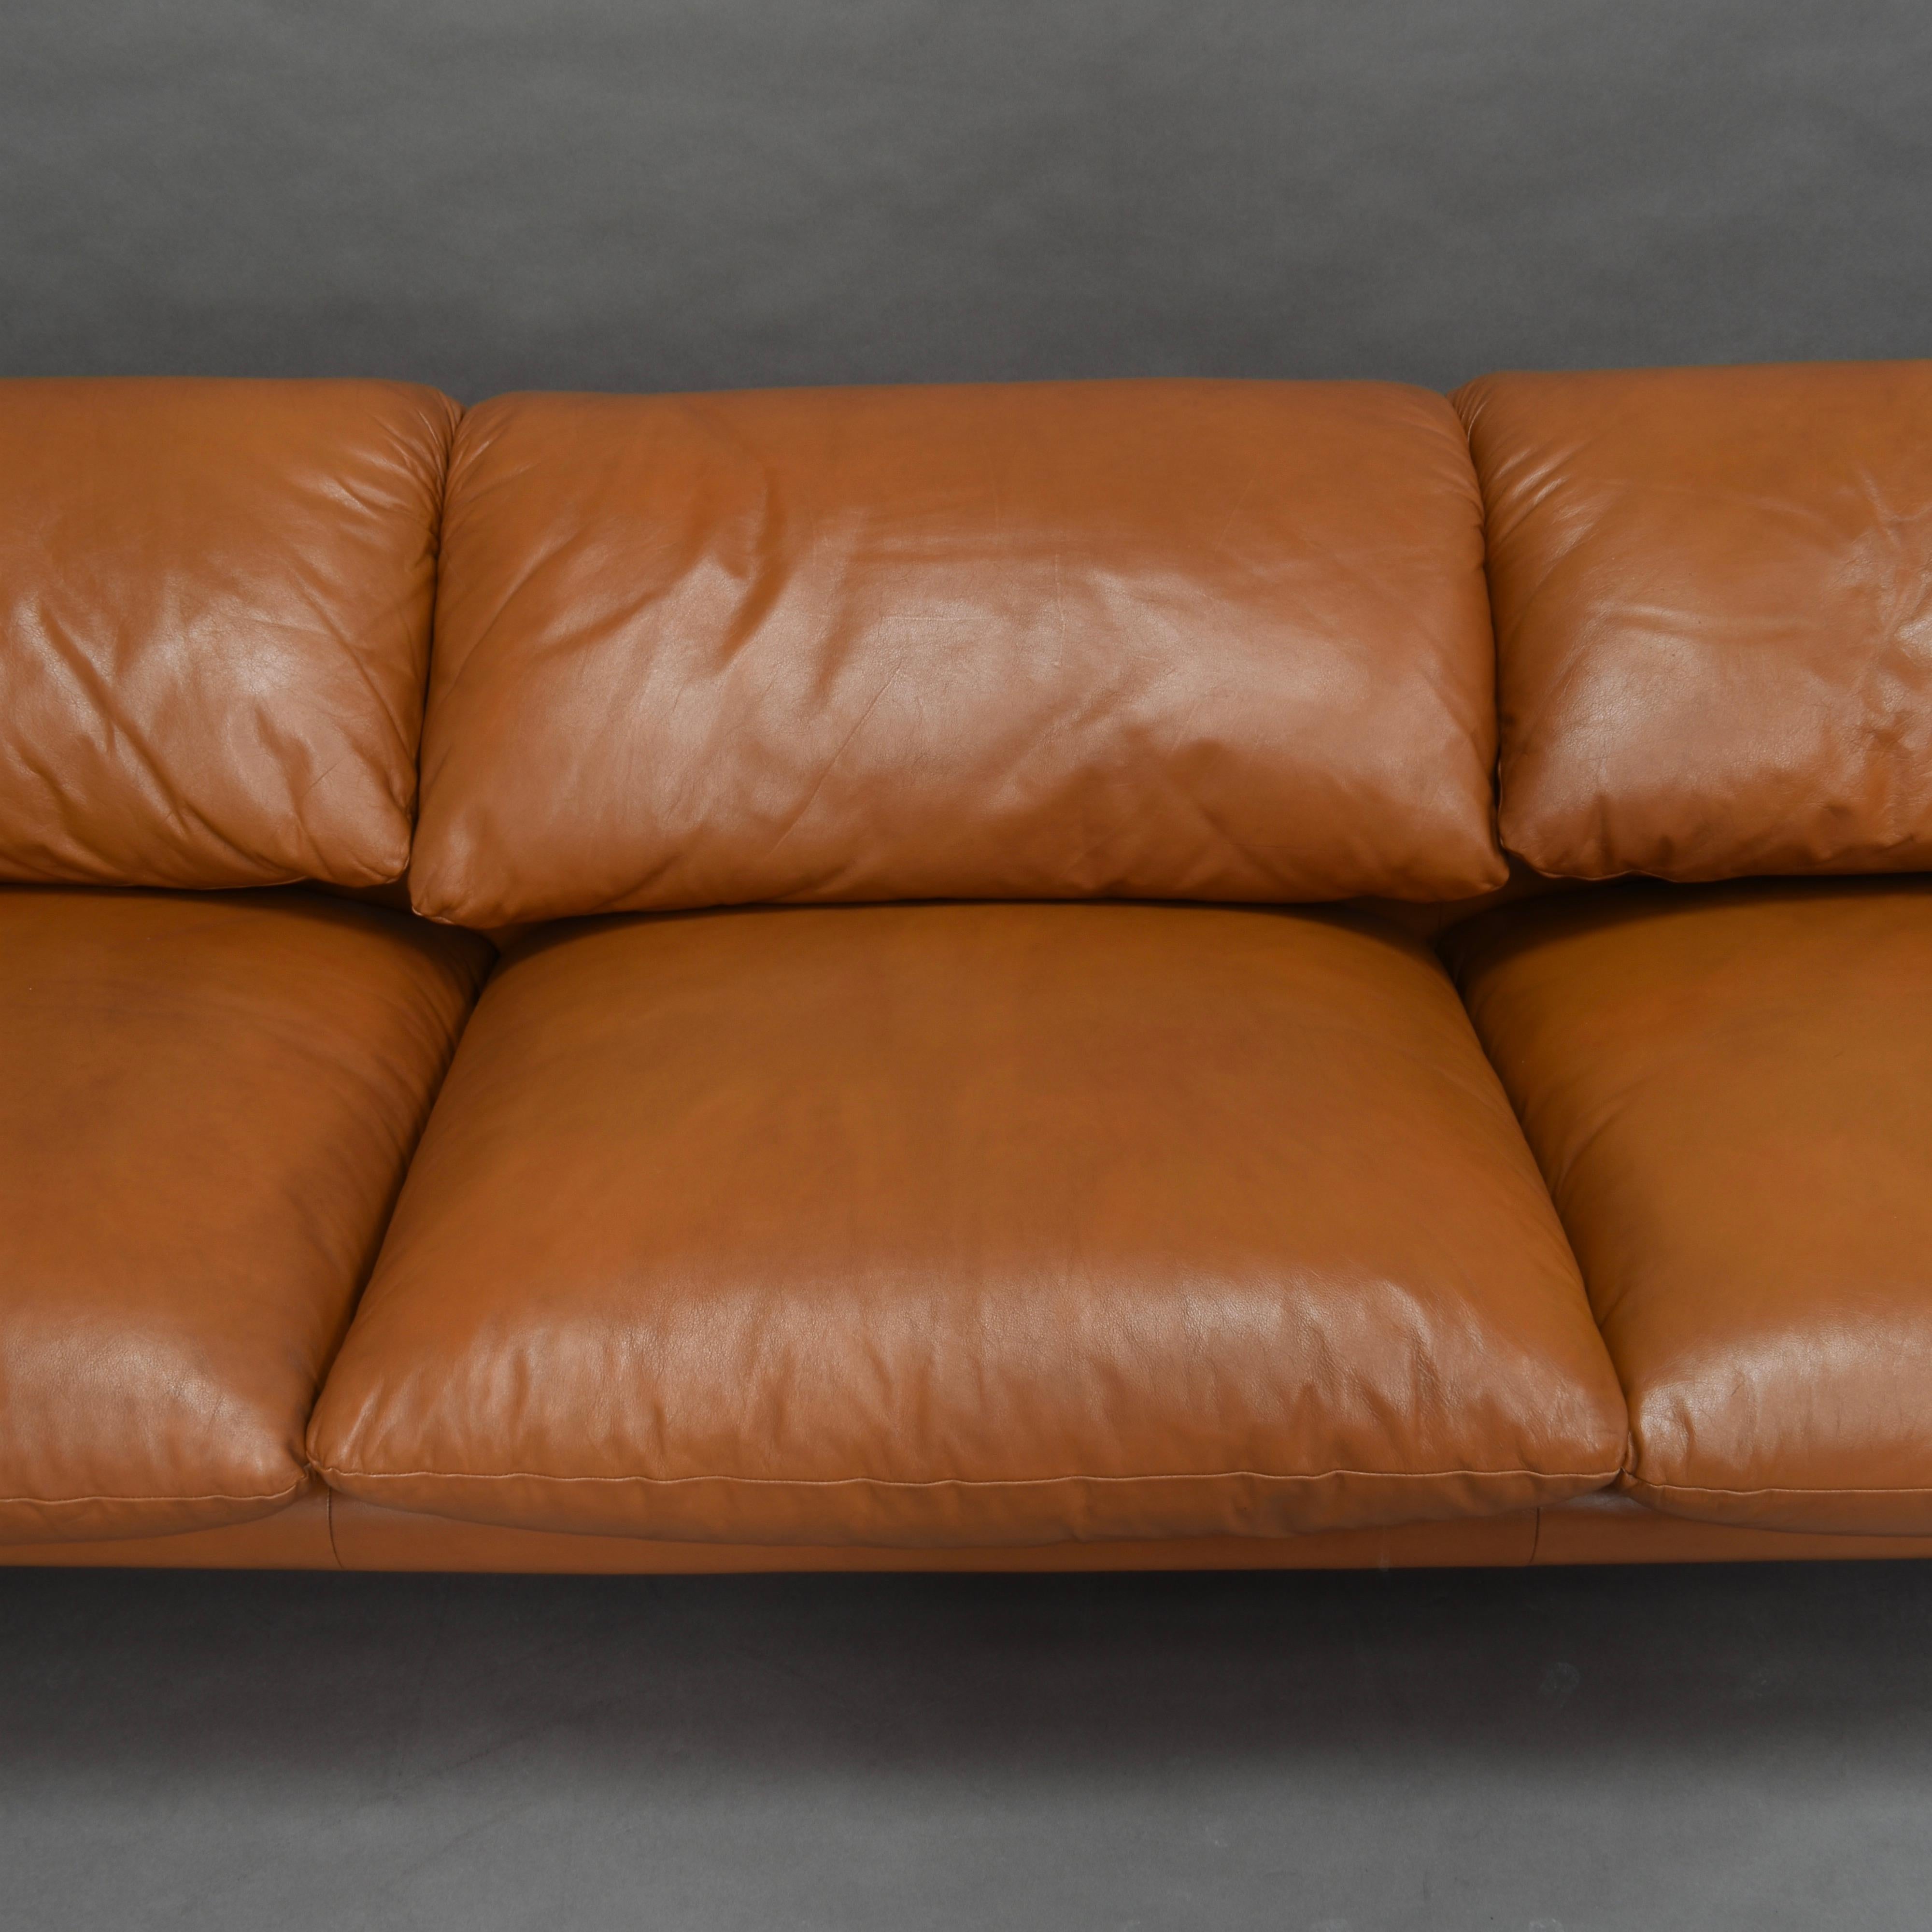 Early Maralunga Sofa in Tan Leather by Vico Magistretti for Cassina, Italy, 1973 1